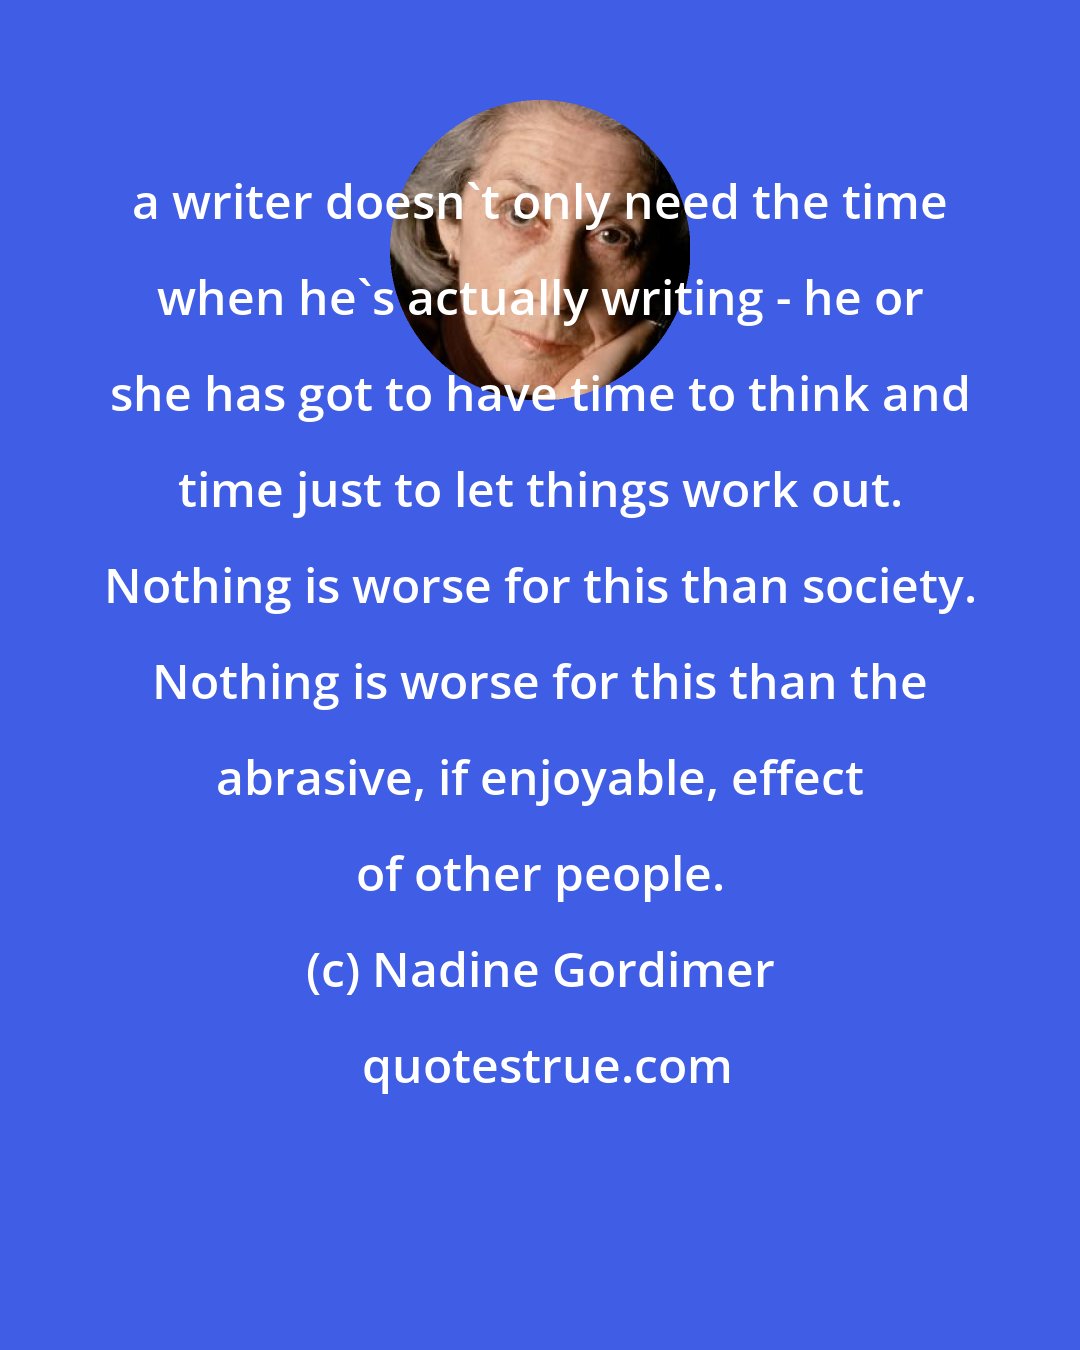 Nadine Gordimer: a writer doesn't only need the time when he's actually writing - he or she has got to have time to think and time just to let things work out. Nothing is worse for this than society. Nothing is worse for this than the abrasive, if enjoyable, effect of other people.